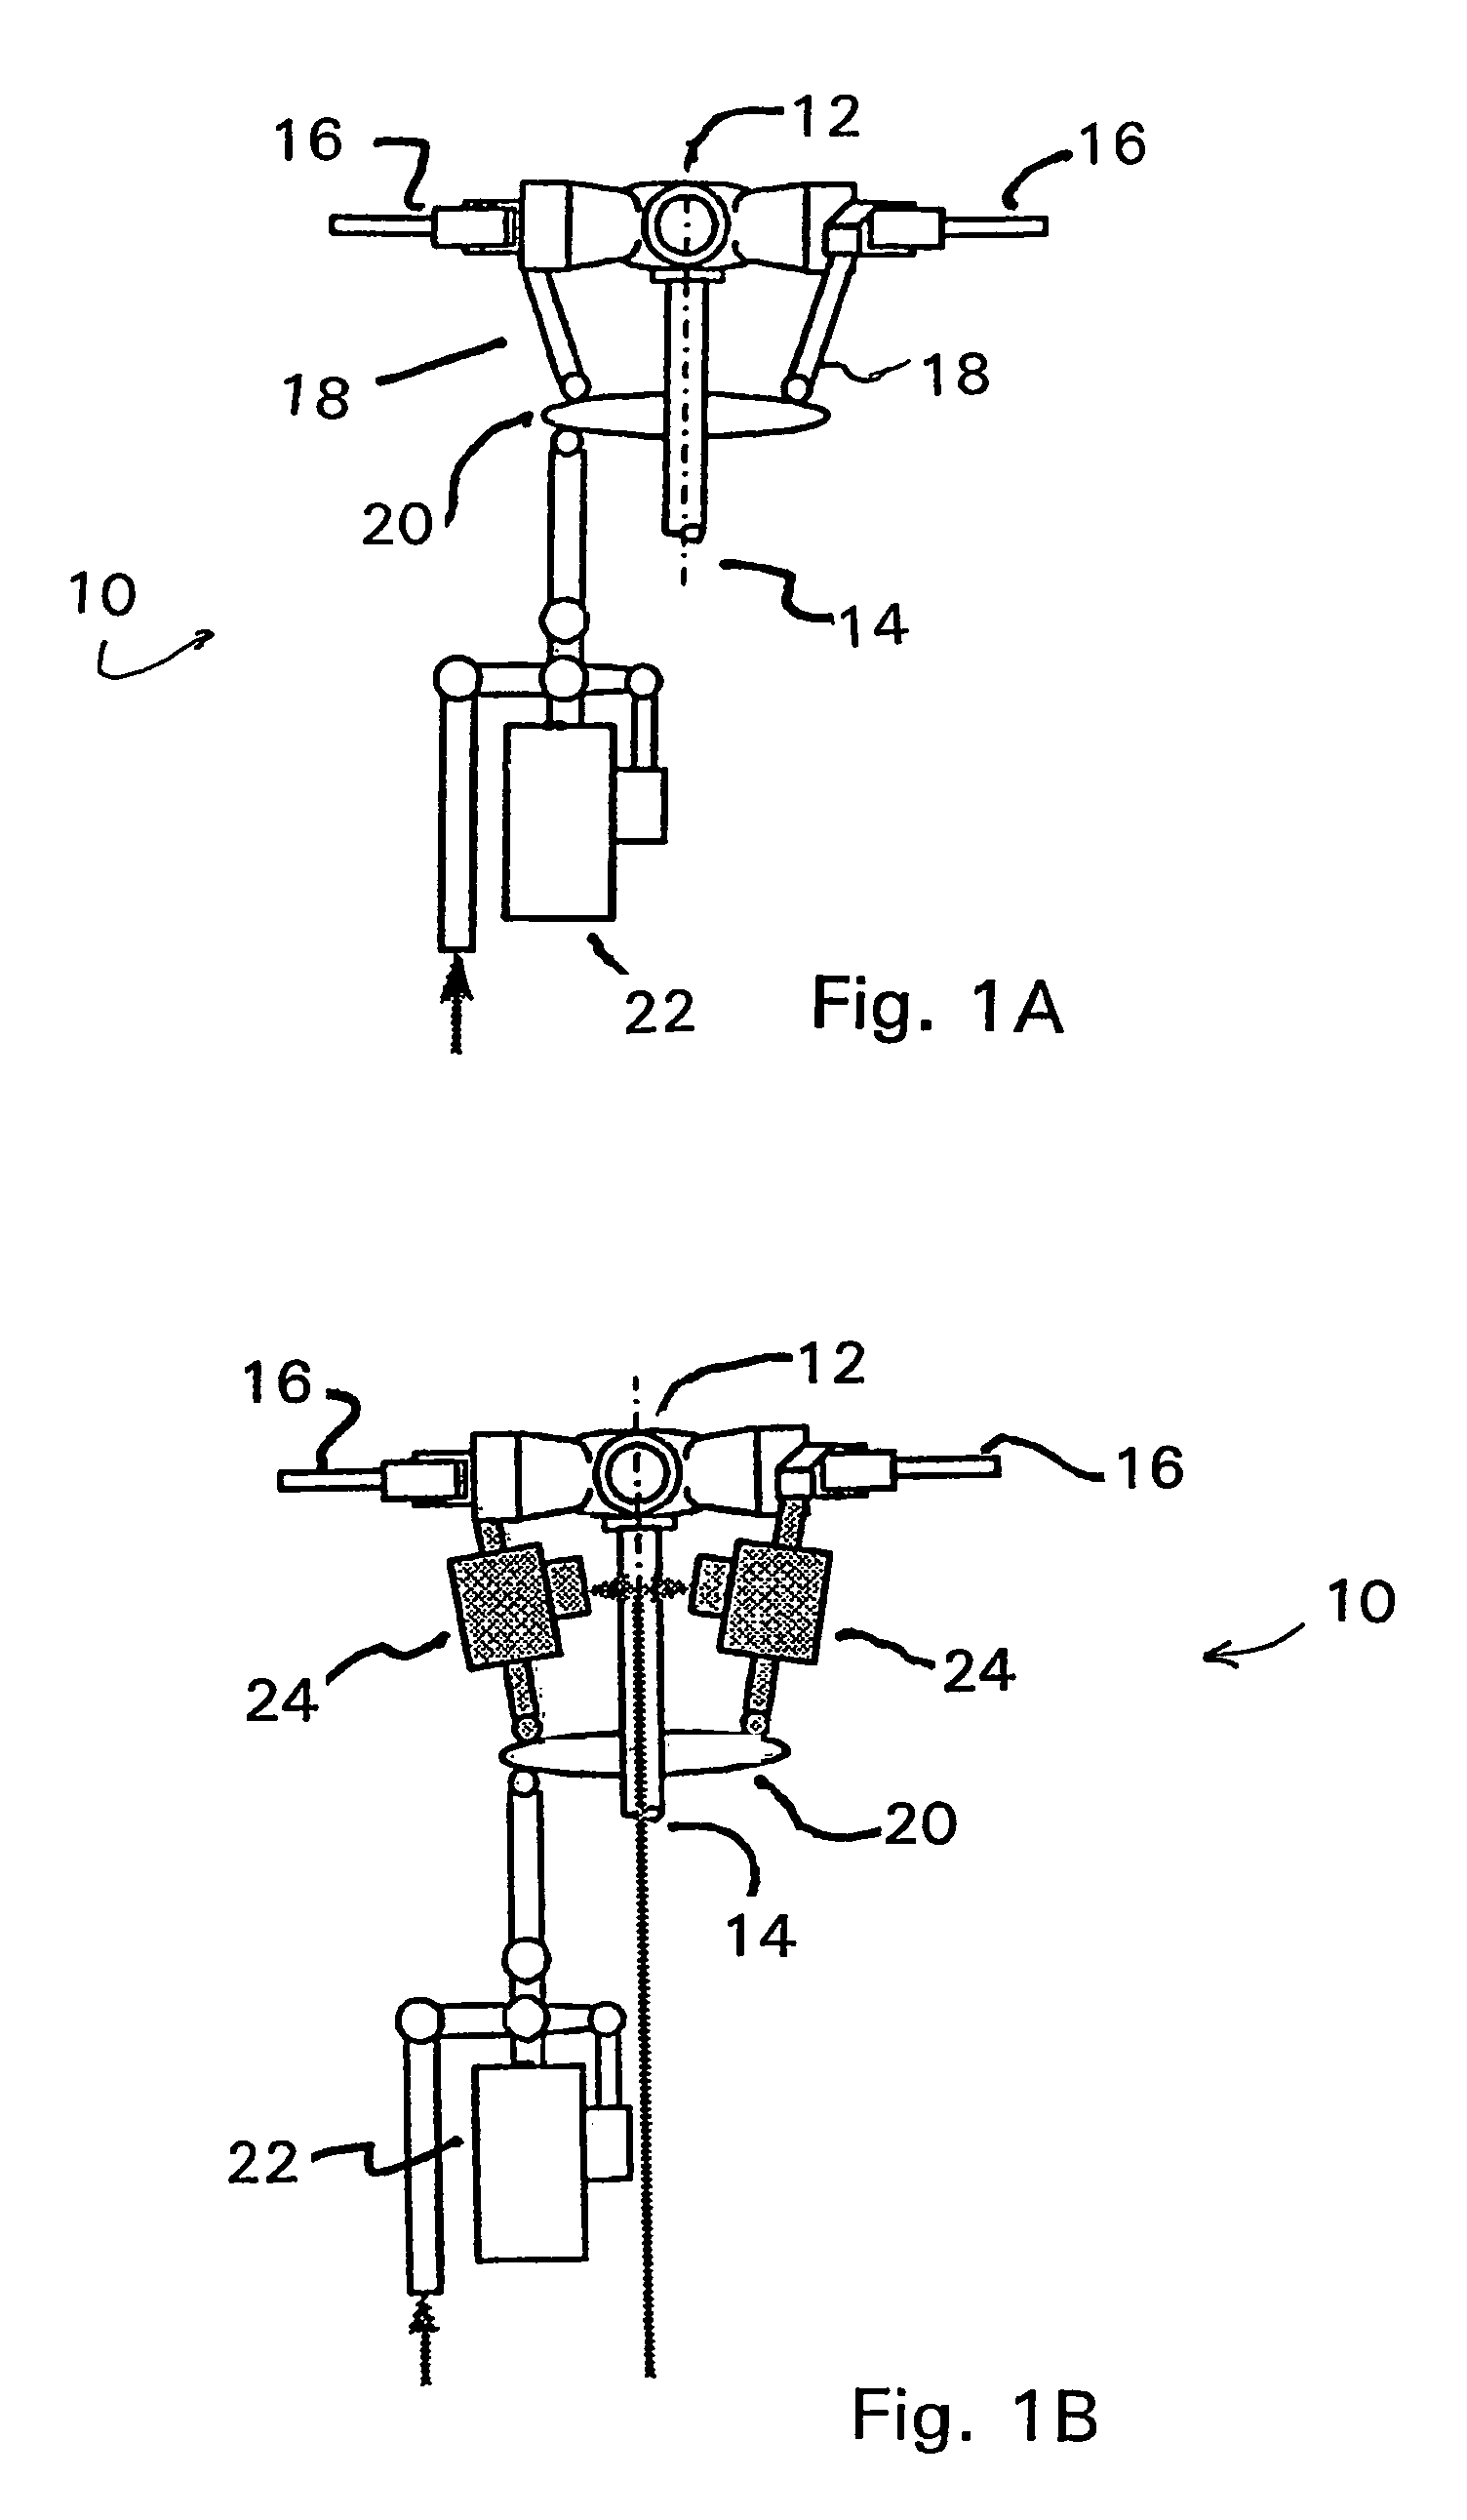 Helicopter rotor control system with individual blade control